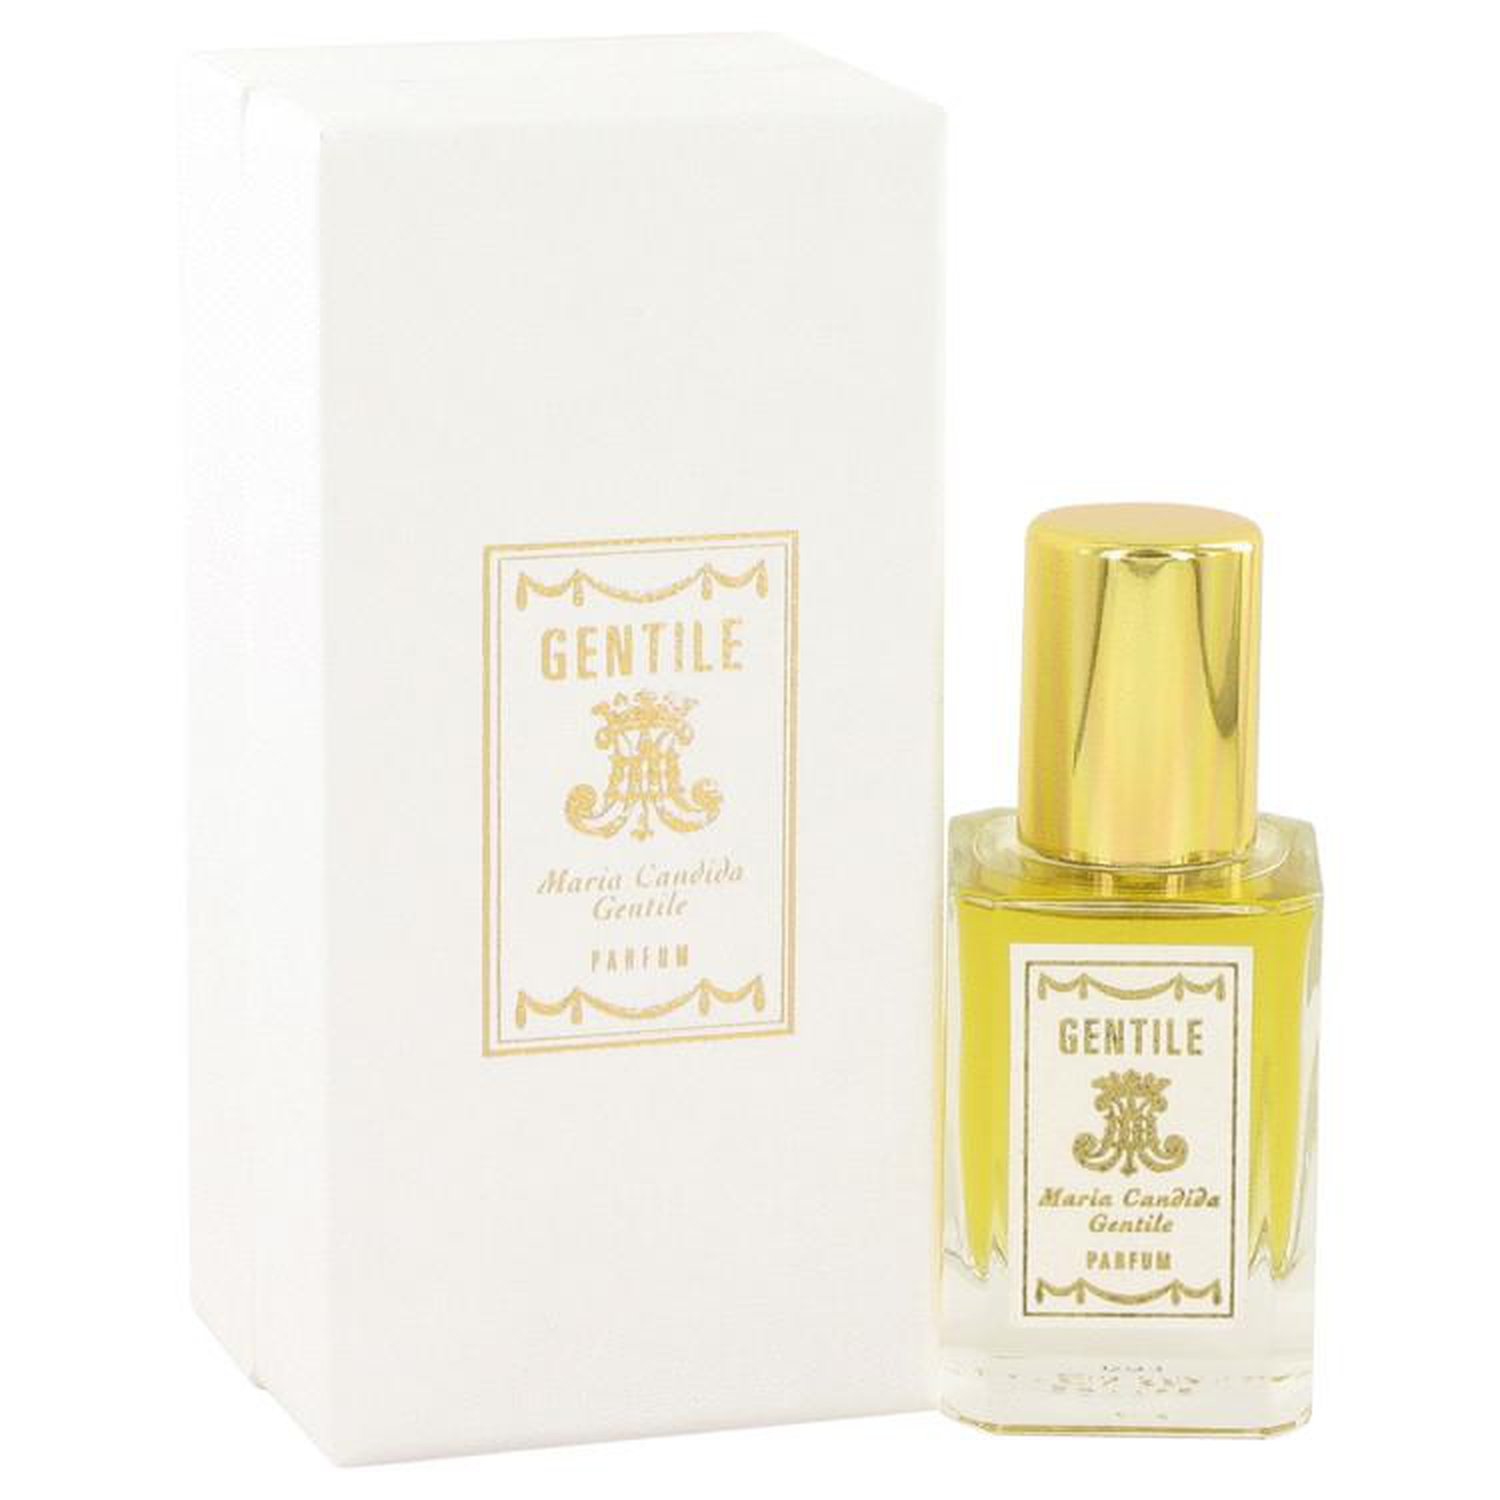 Gentile by Maria Candida Gentile Pure Perfume (Women) 1 oz